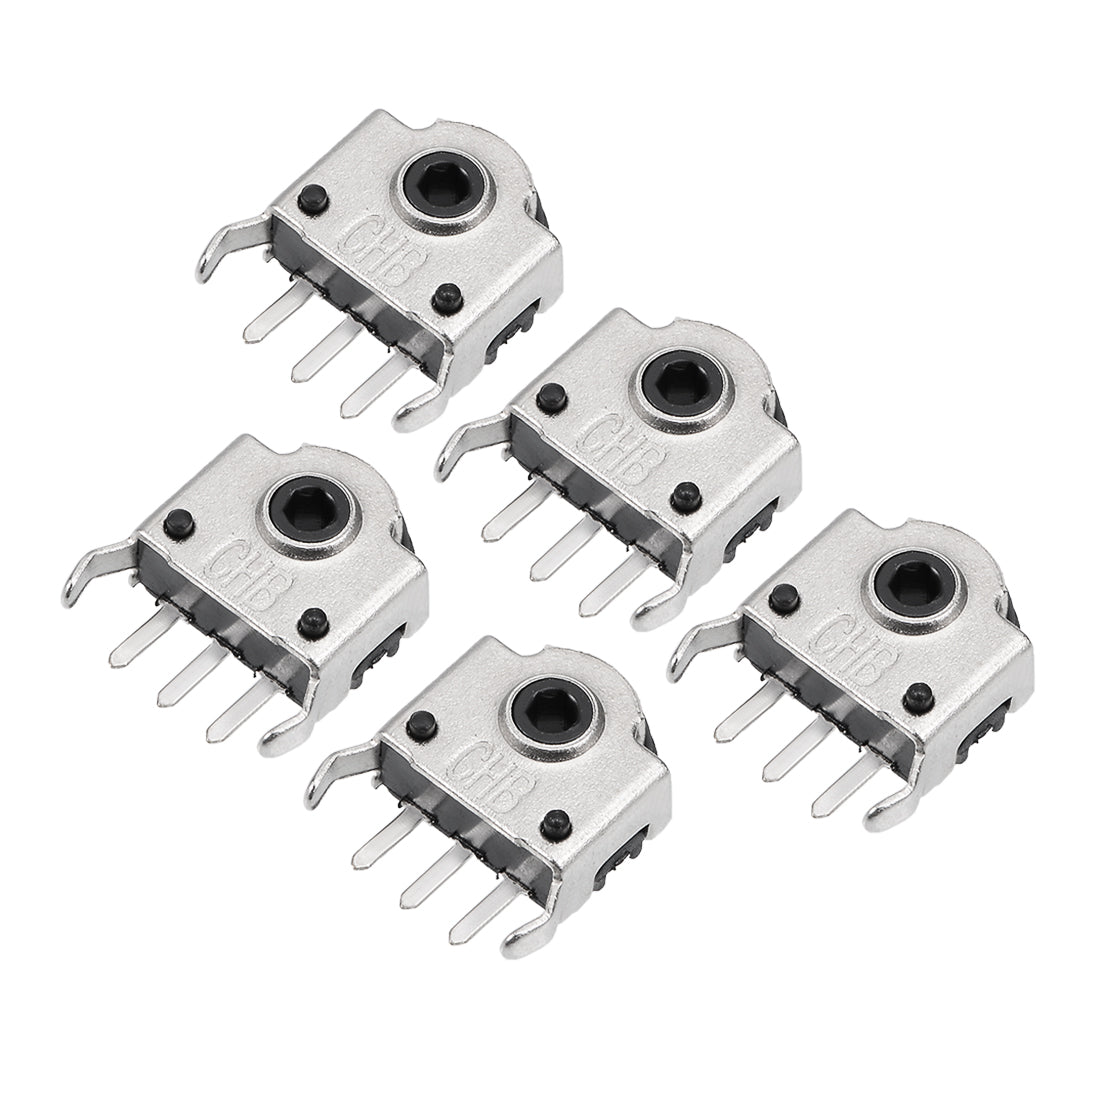 uxcell Uxcell 5 Pcs 5mm Encoder Switch Mouse Encoder Scroll Wheel Repair Part Switch